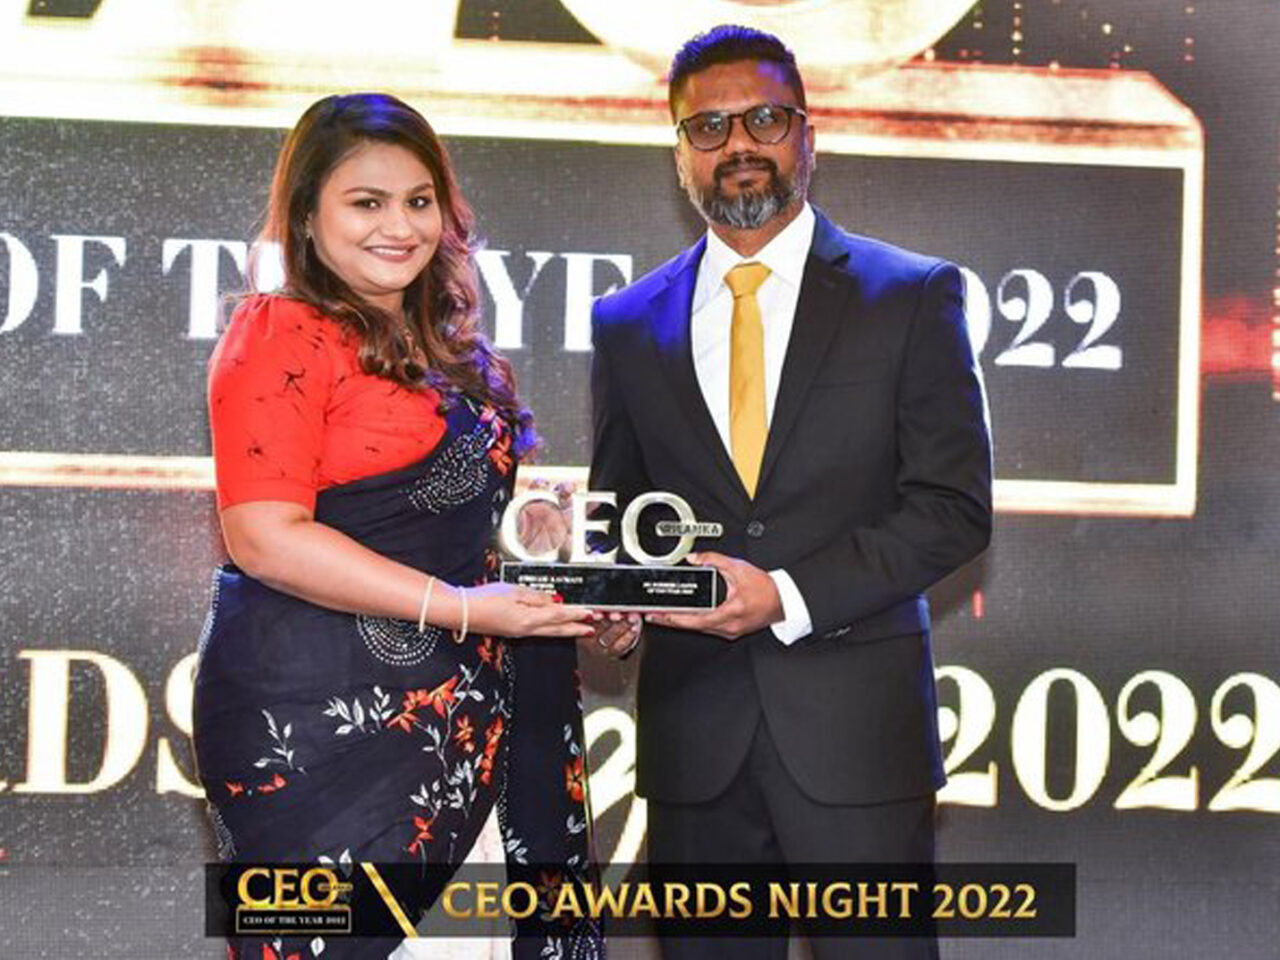 HR Business Leader of the Year 2022’ Award at CEO Awards 2022